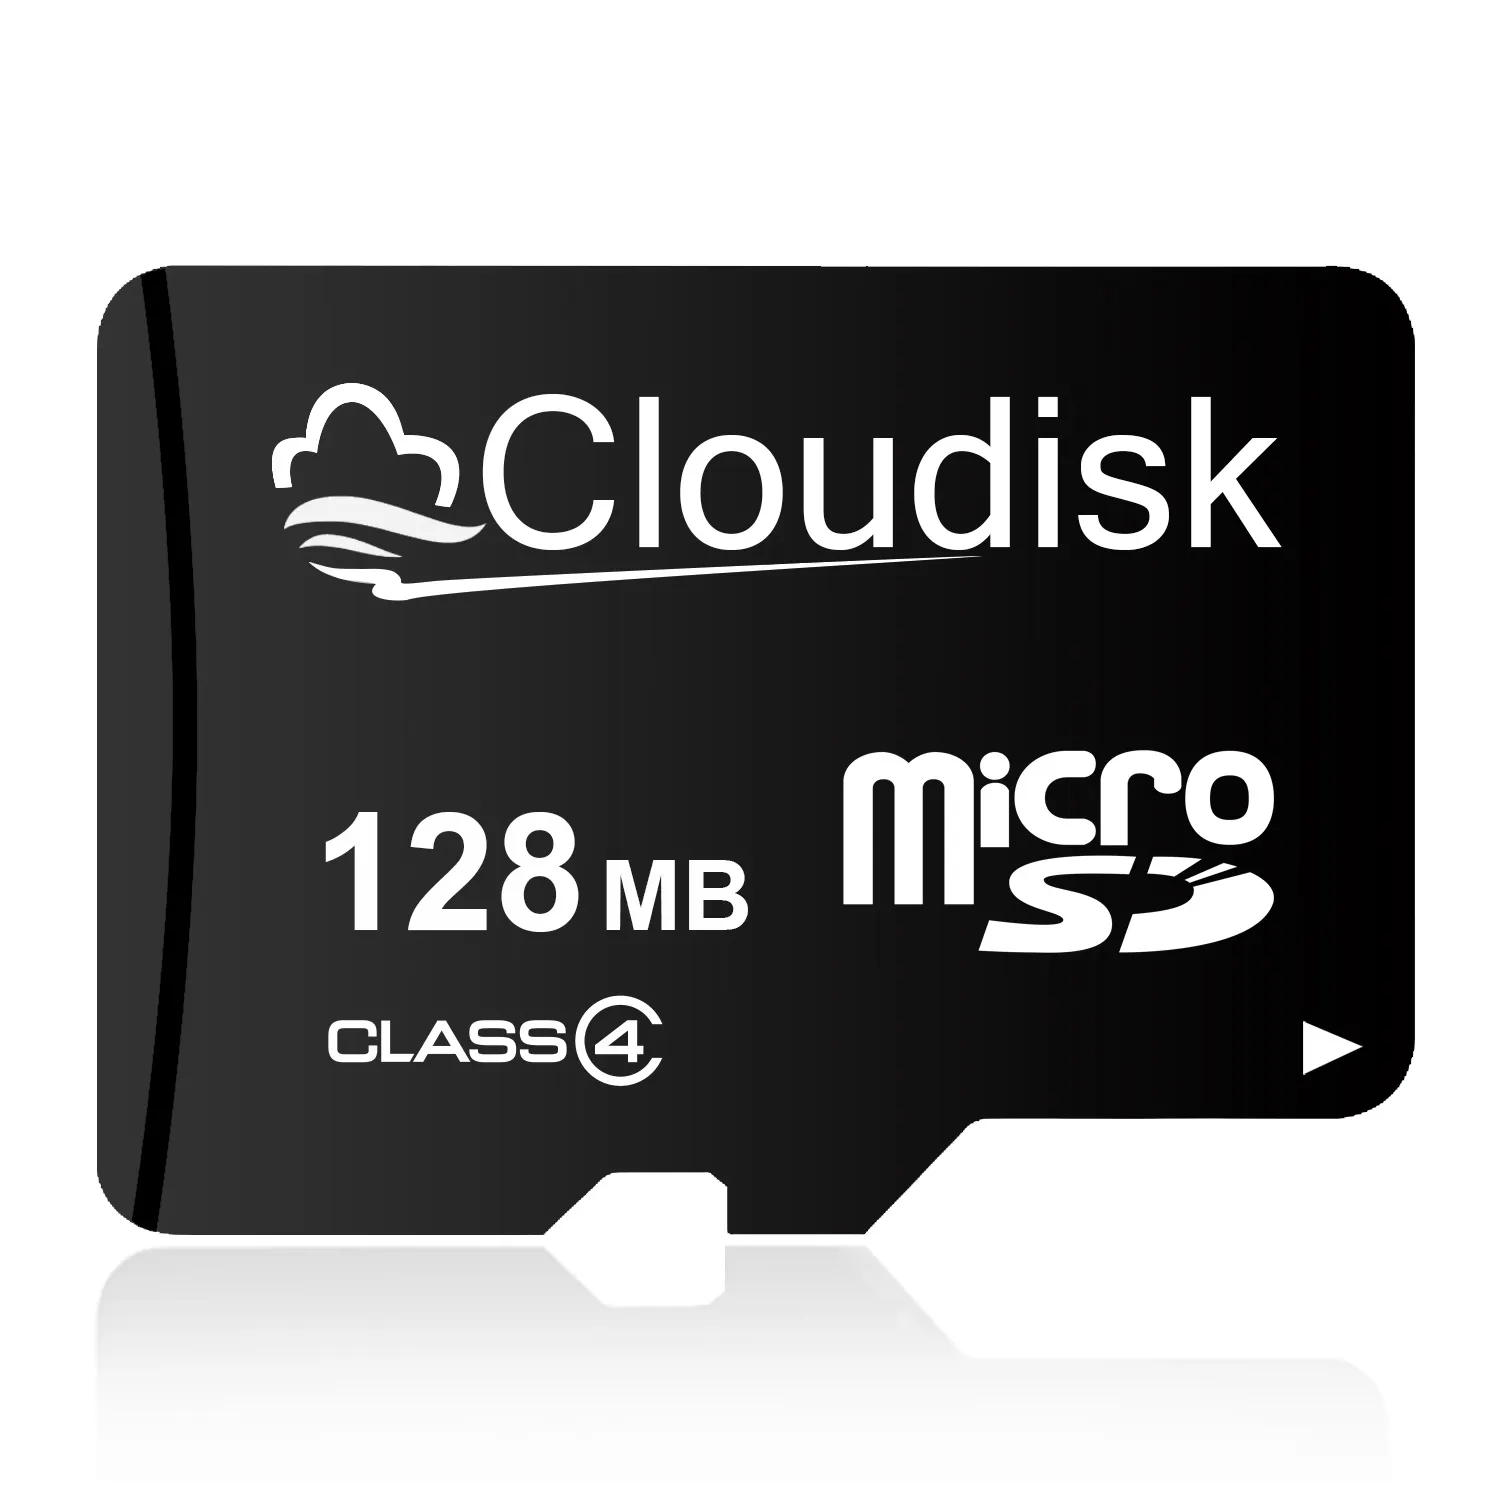 Highest Quality Micro SD Card 128MB 256MB 512MB Class 4 Bulk 1GB Memory Card SD Card for Sandisk MicroSD Authorized by 3C Group